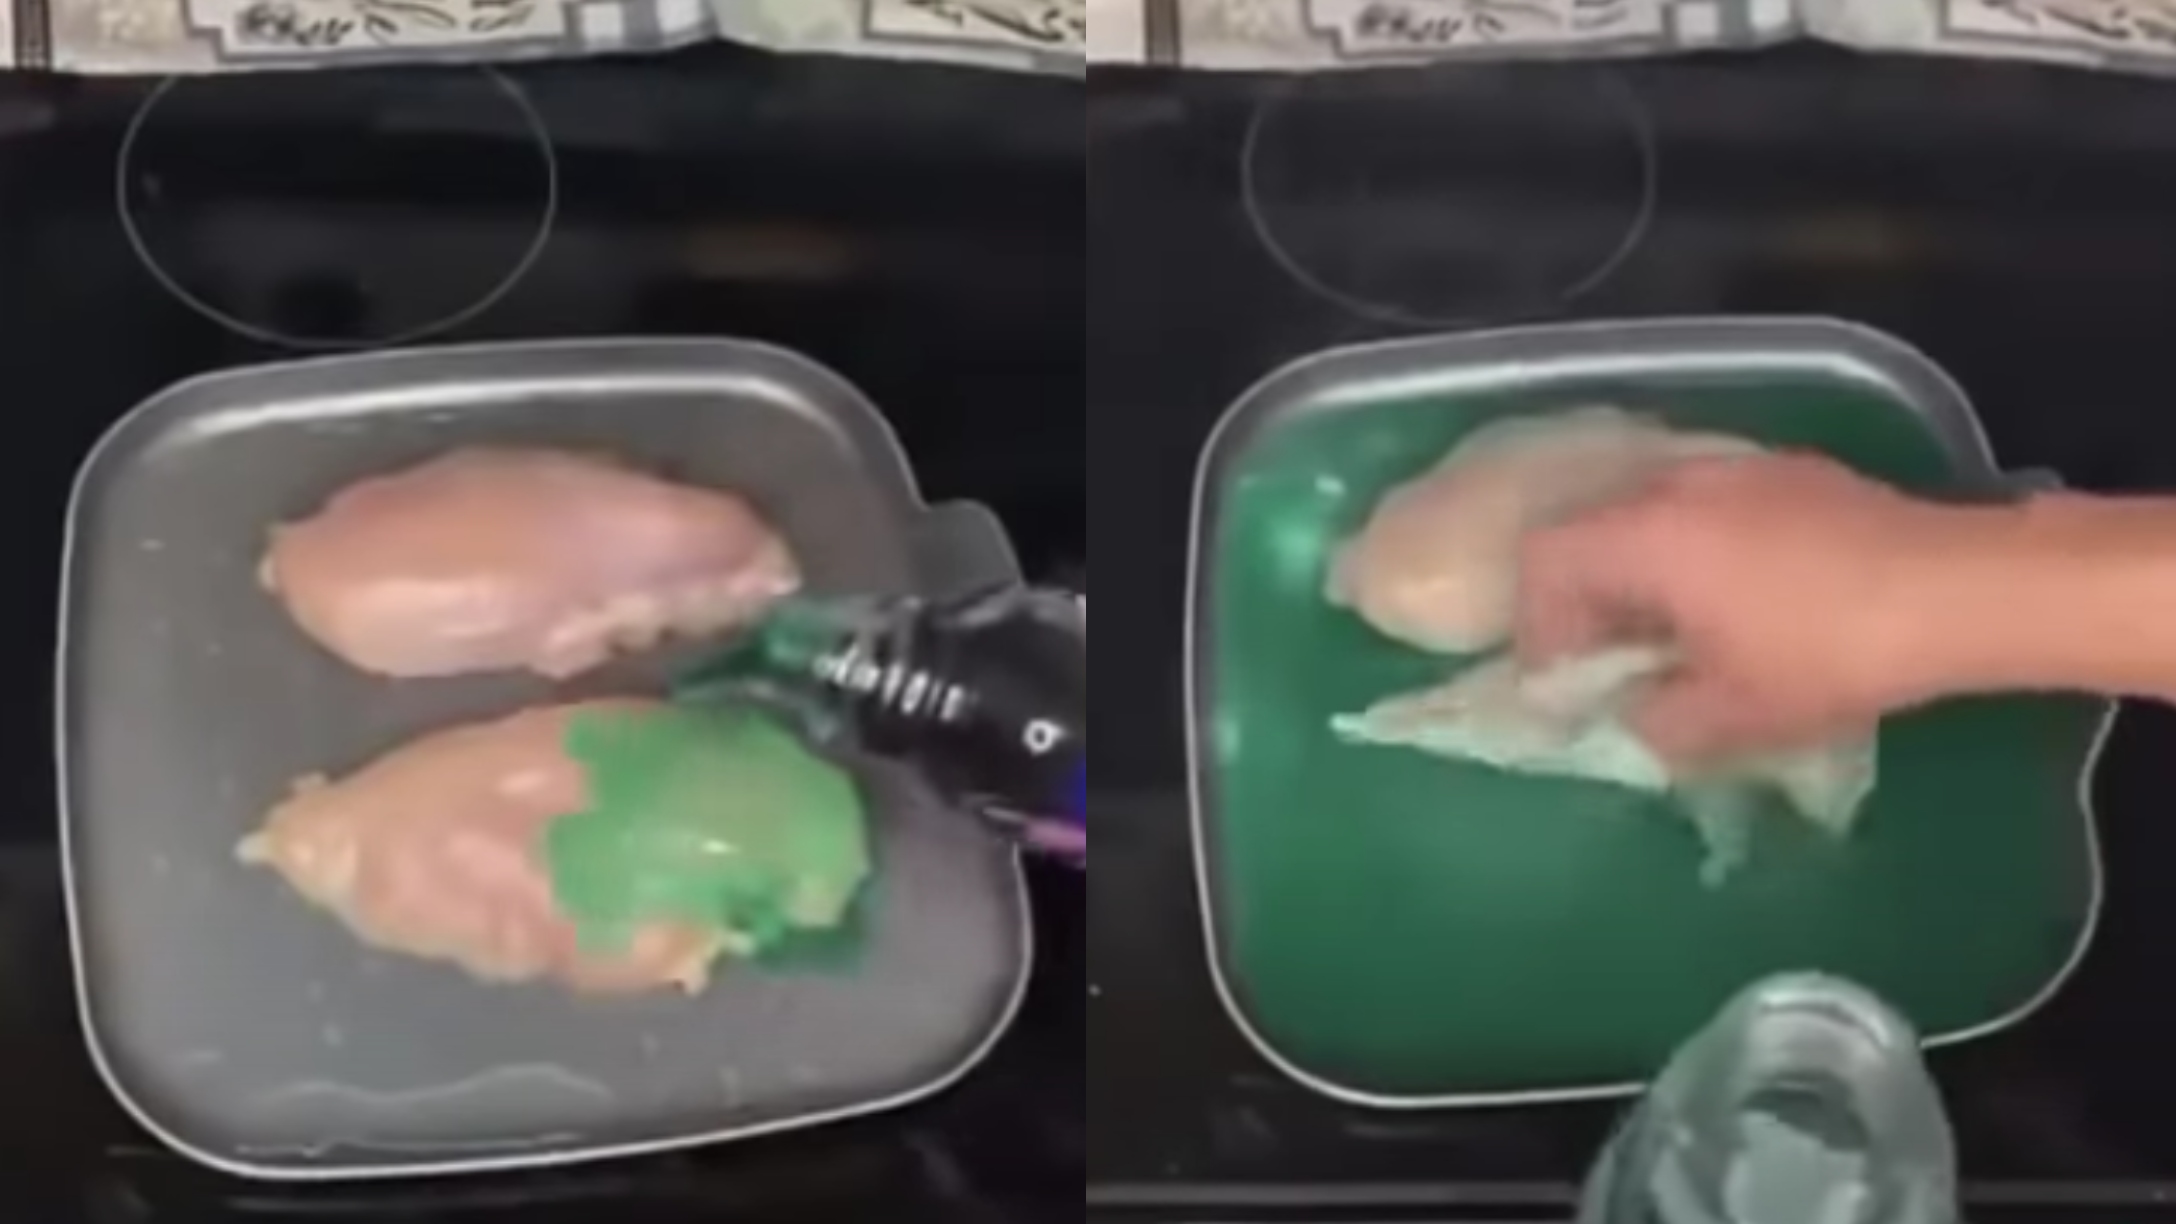 'NyQuil Chicken' is the latest horrifying TikTok trend 